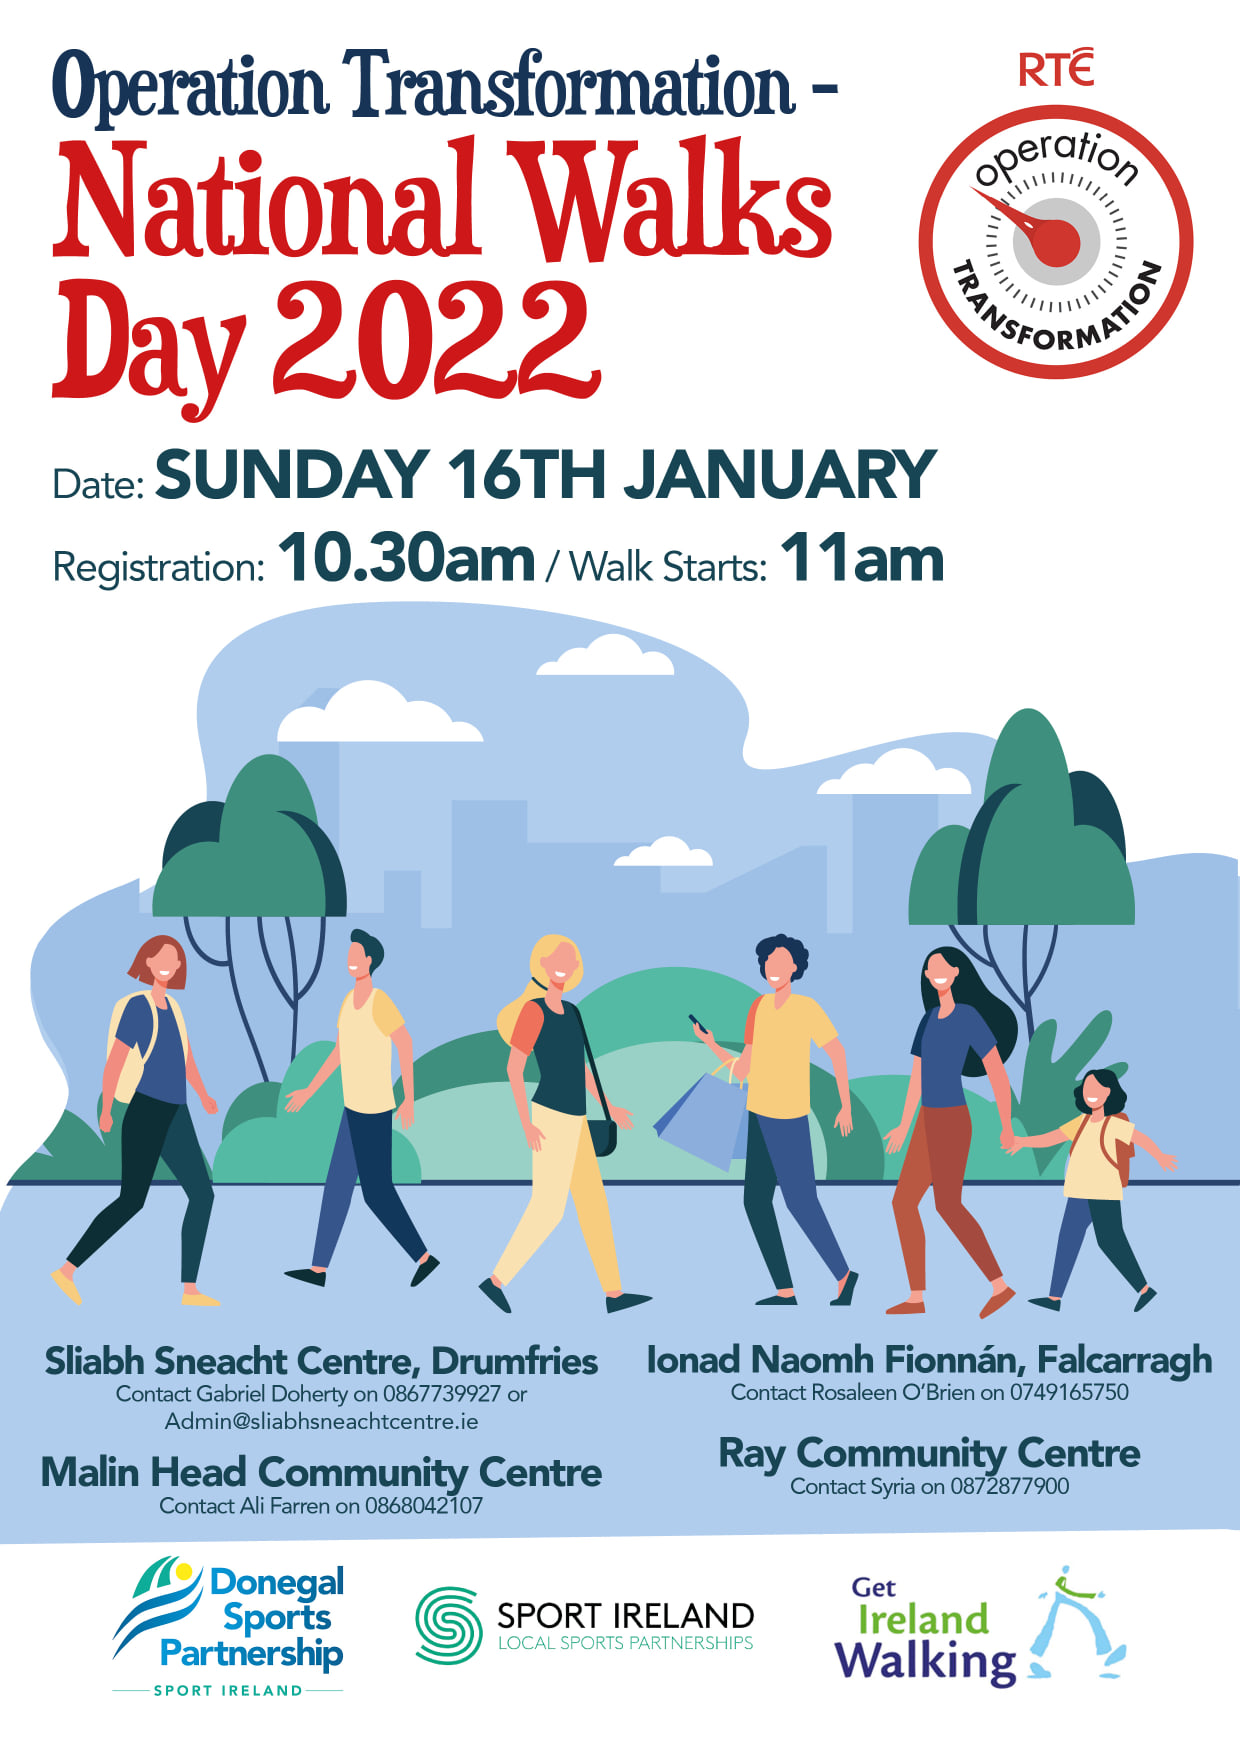 OPERATION TRANSFORMATION NATIONAL WALKS DAY 2022 - Donegal Sports